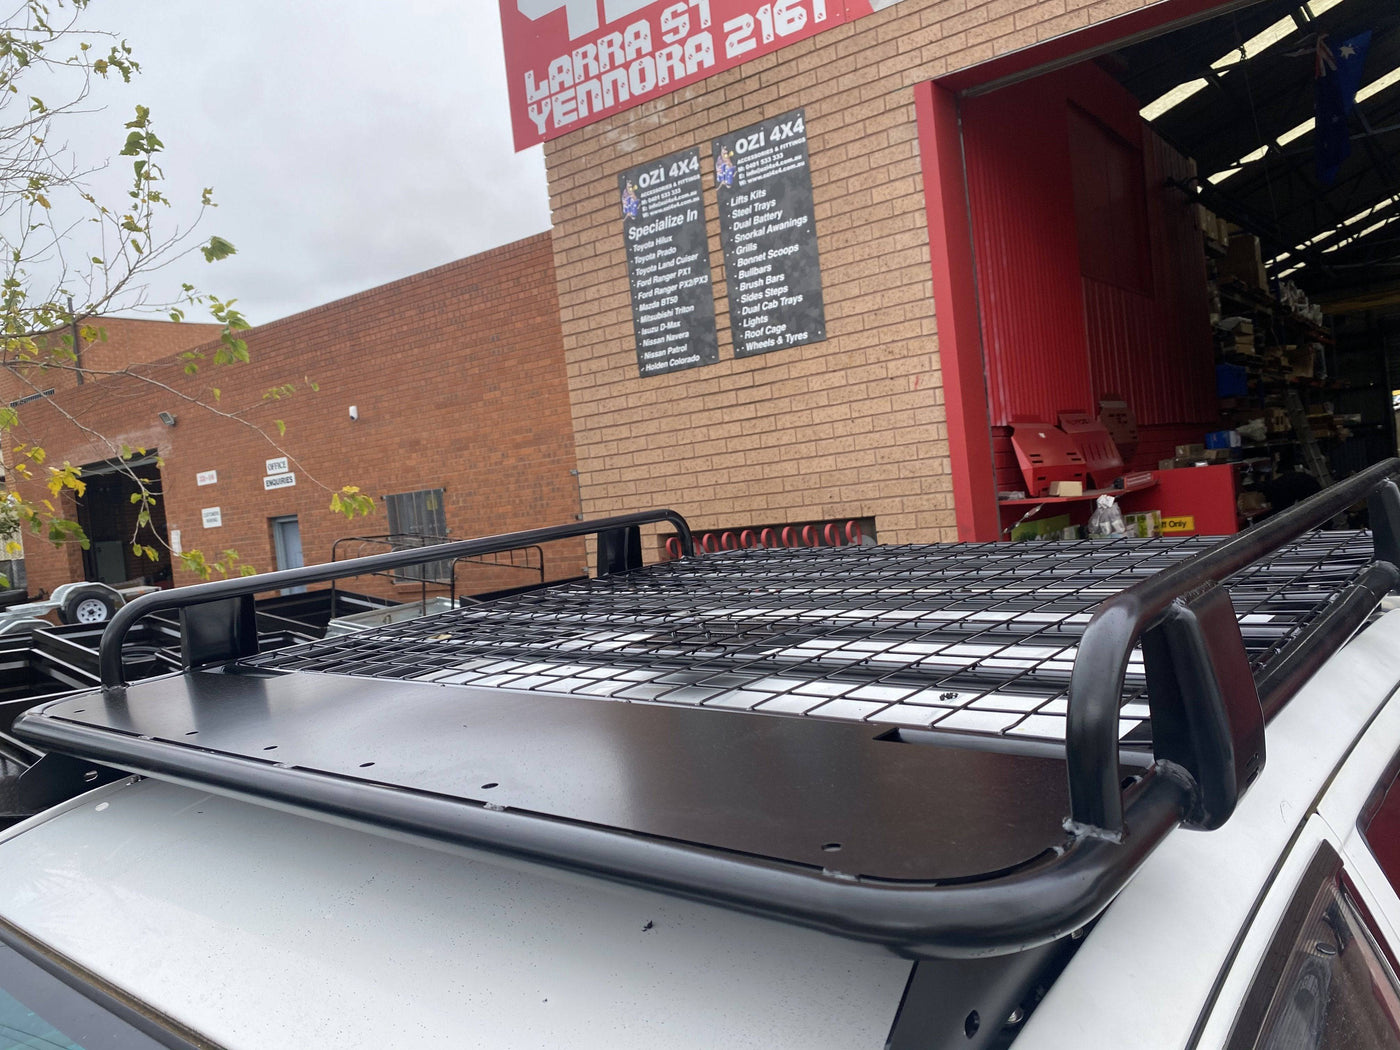 Tradesman Steel Roof Cage for all (Single Cab)